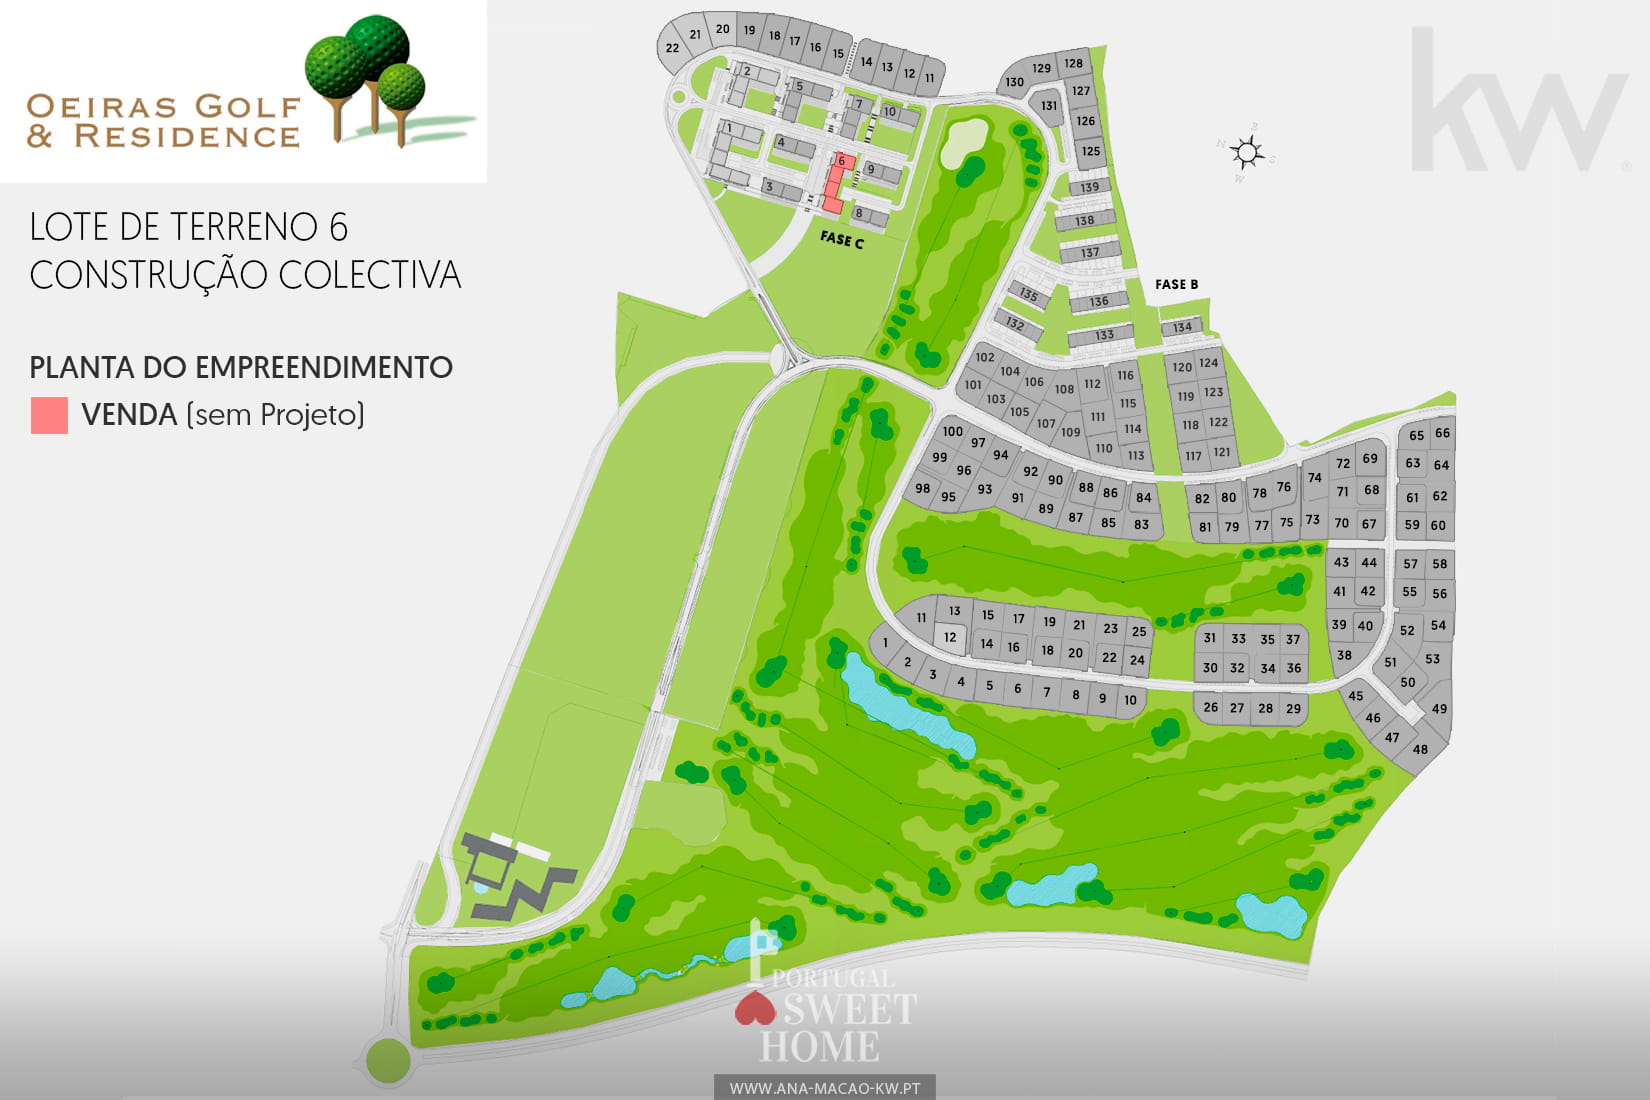 Location map of Lot 6 in the development